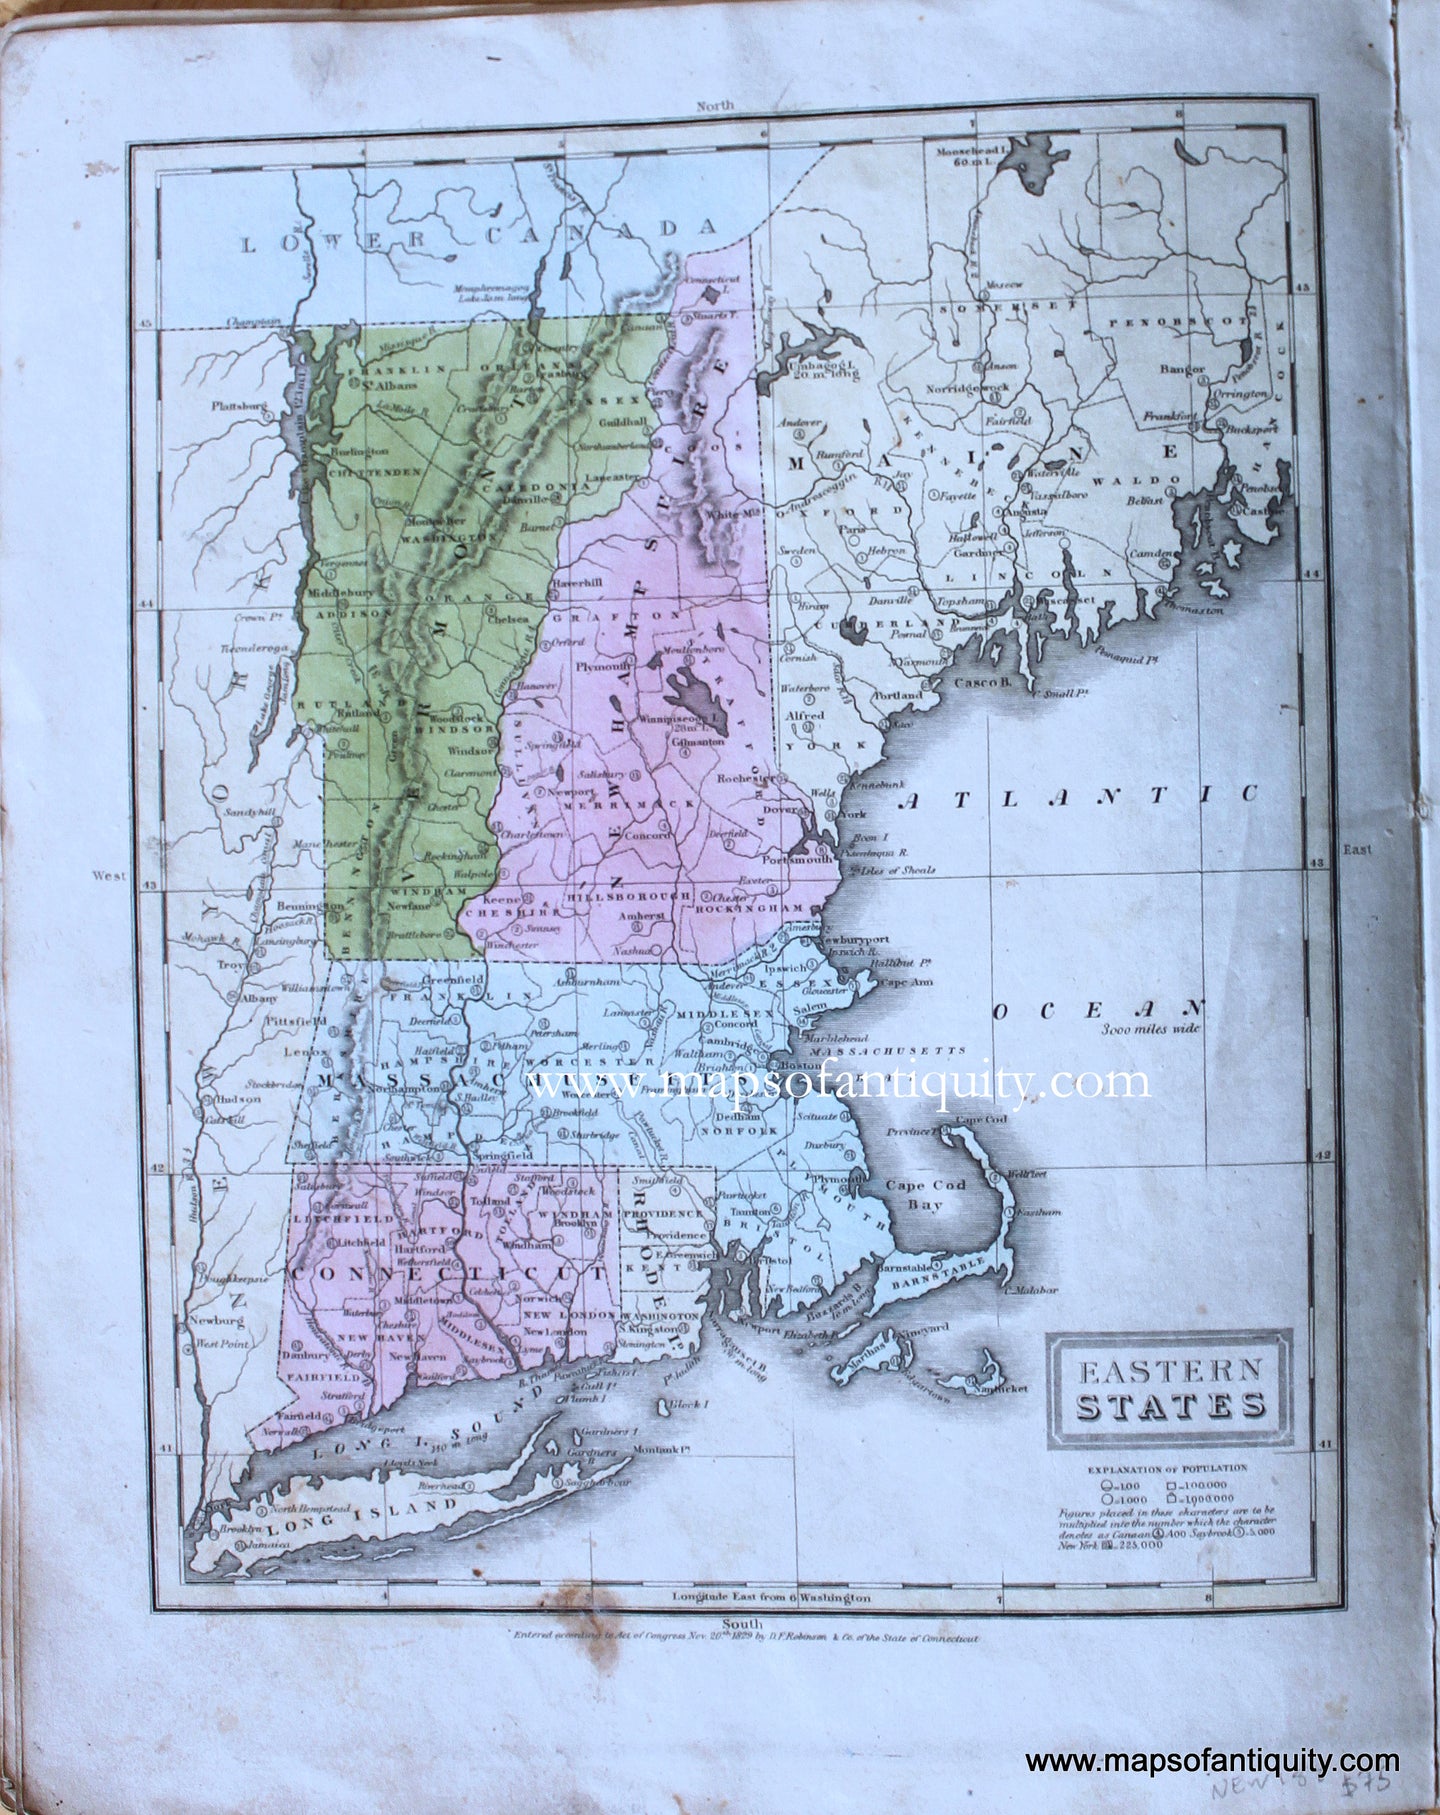 Genuine-Antique-Map-Eastern-States-1830-E.-Huntington-/-D.F.-Robinson-&-Co.-Maps-Of-Antiquity